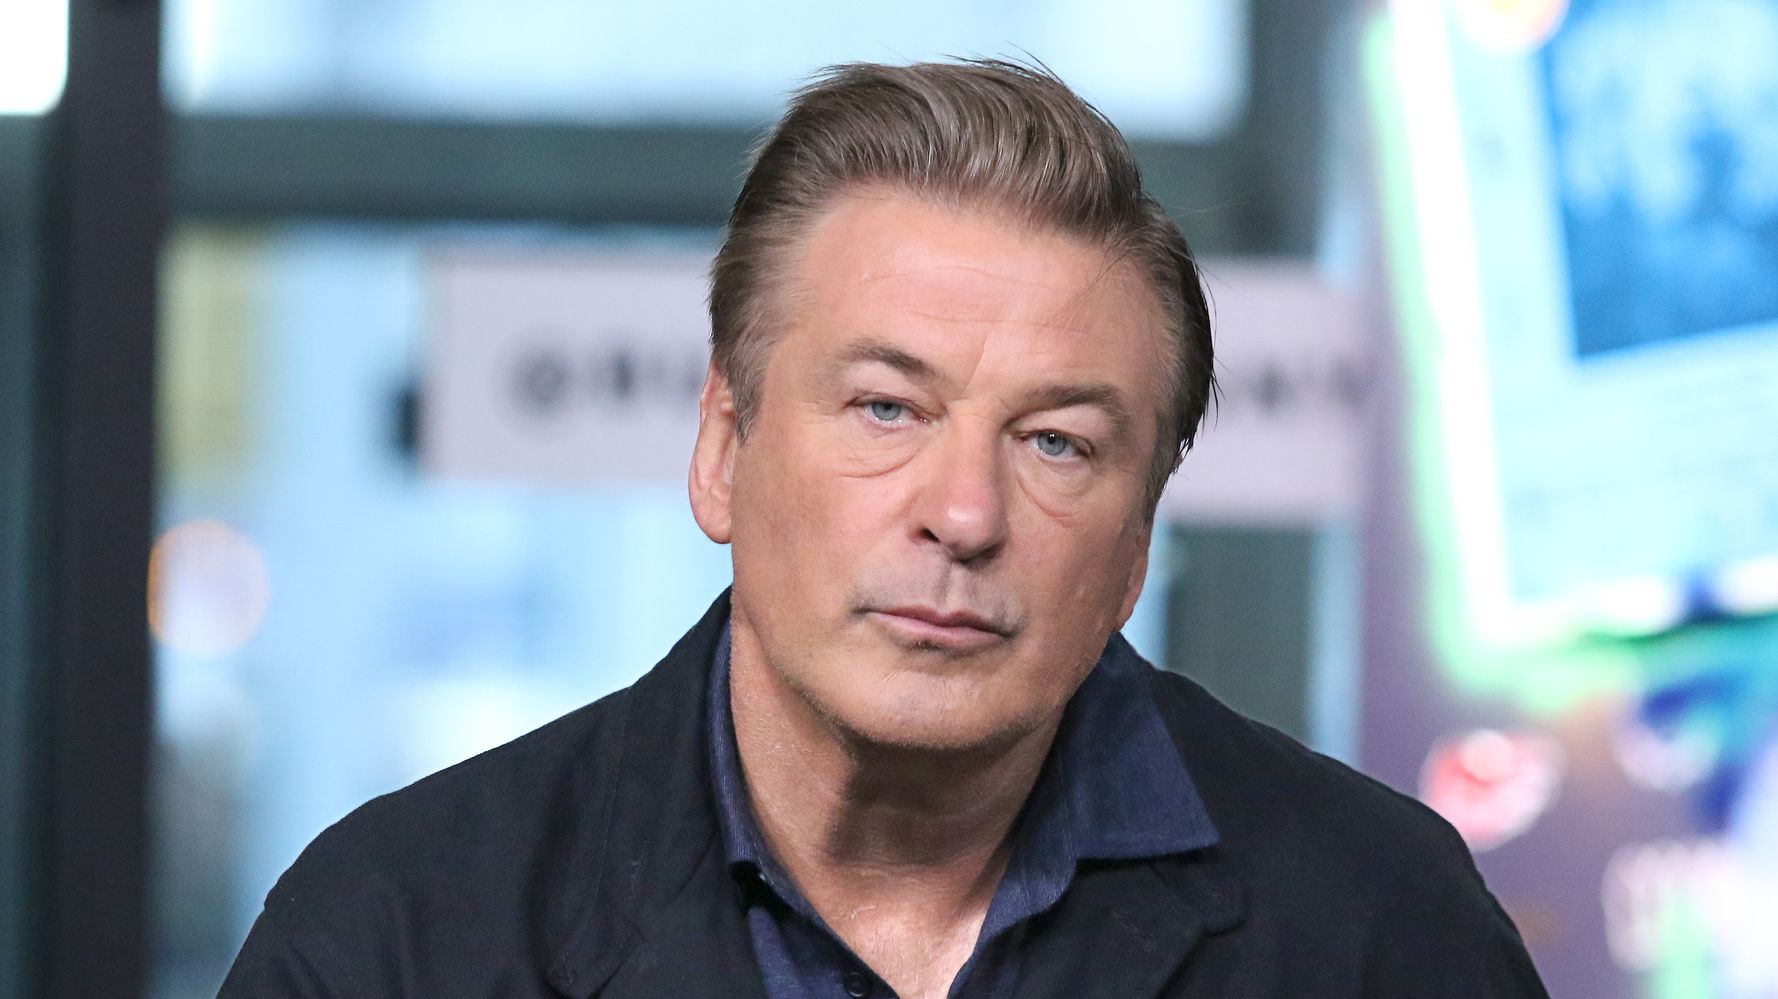 Alec Baldwin exits Twitter again amid conflicts by Gillian Anderson Dig